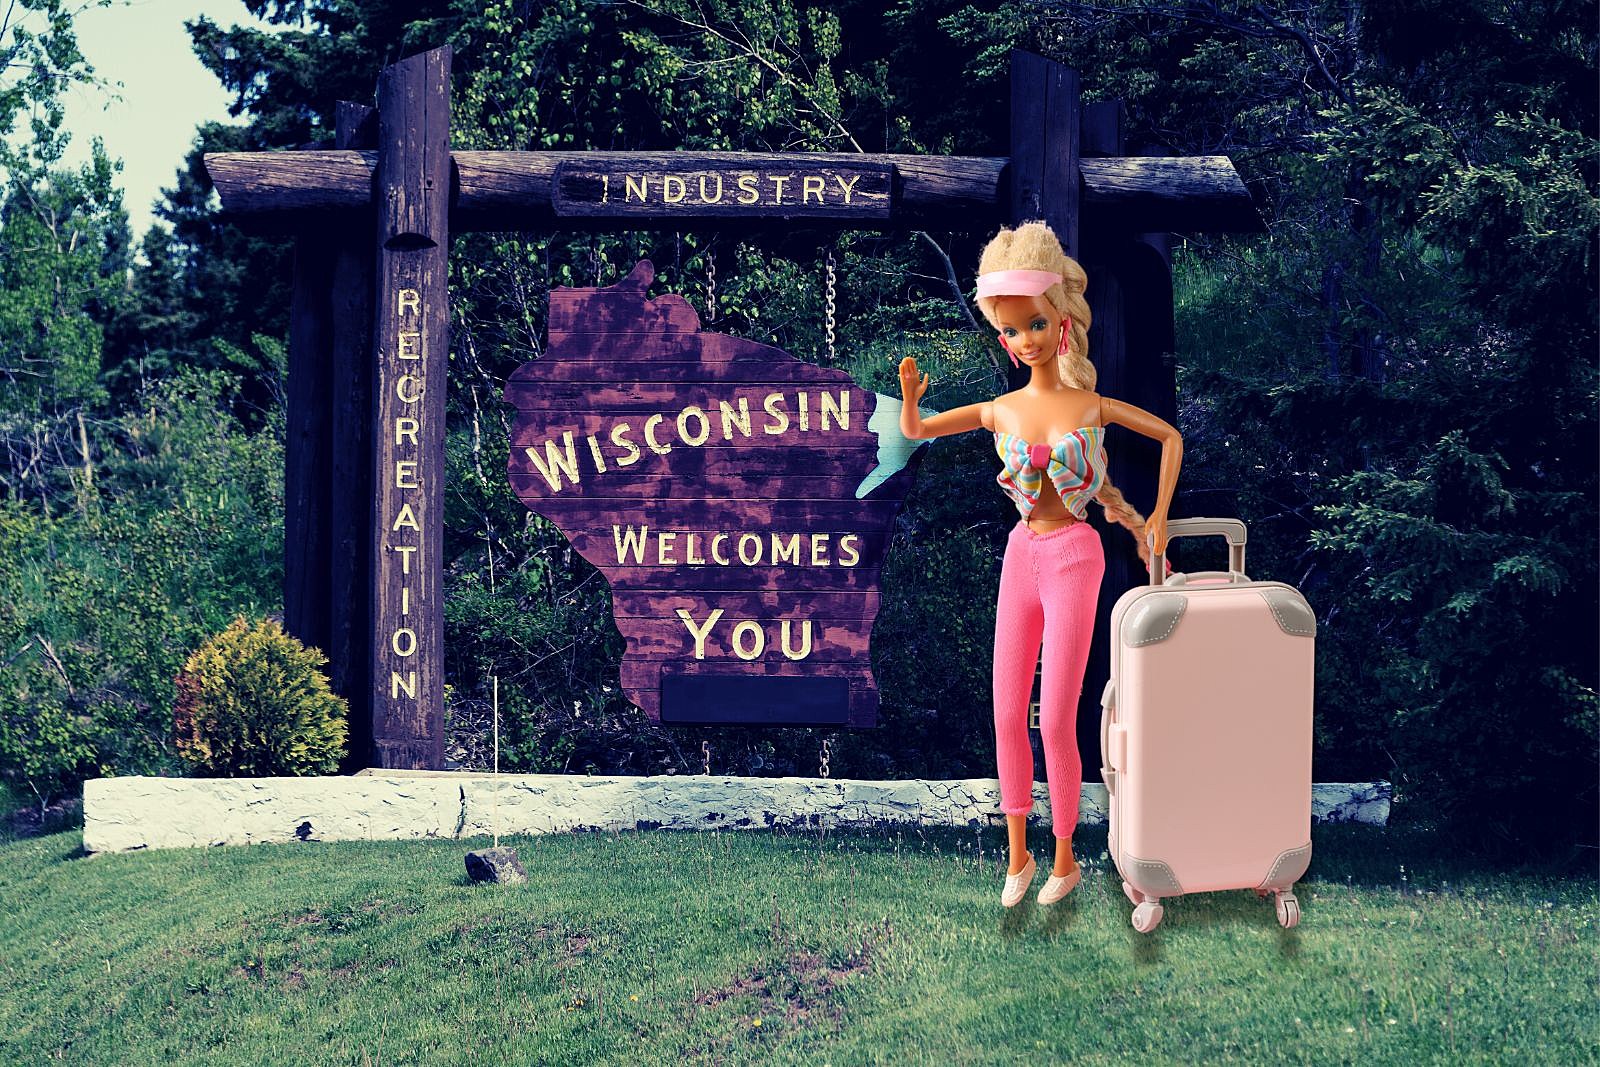 Barbie's Wisconsin connection